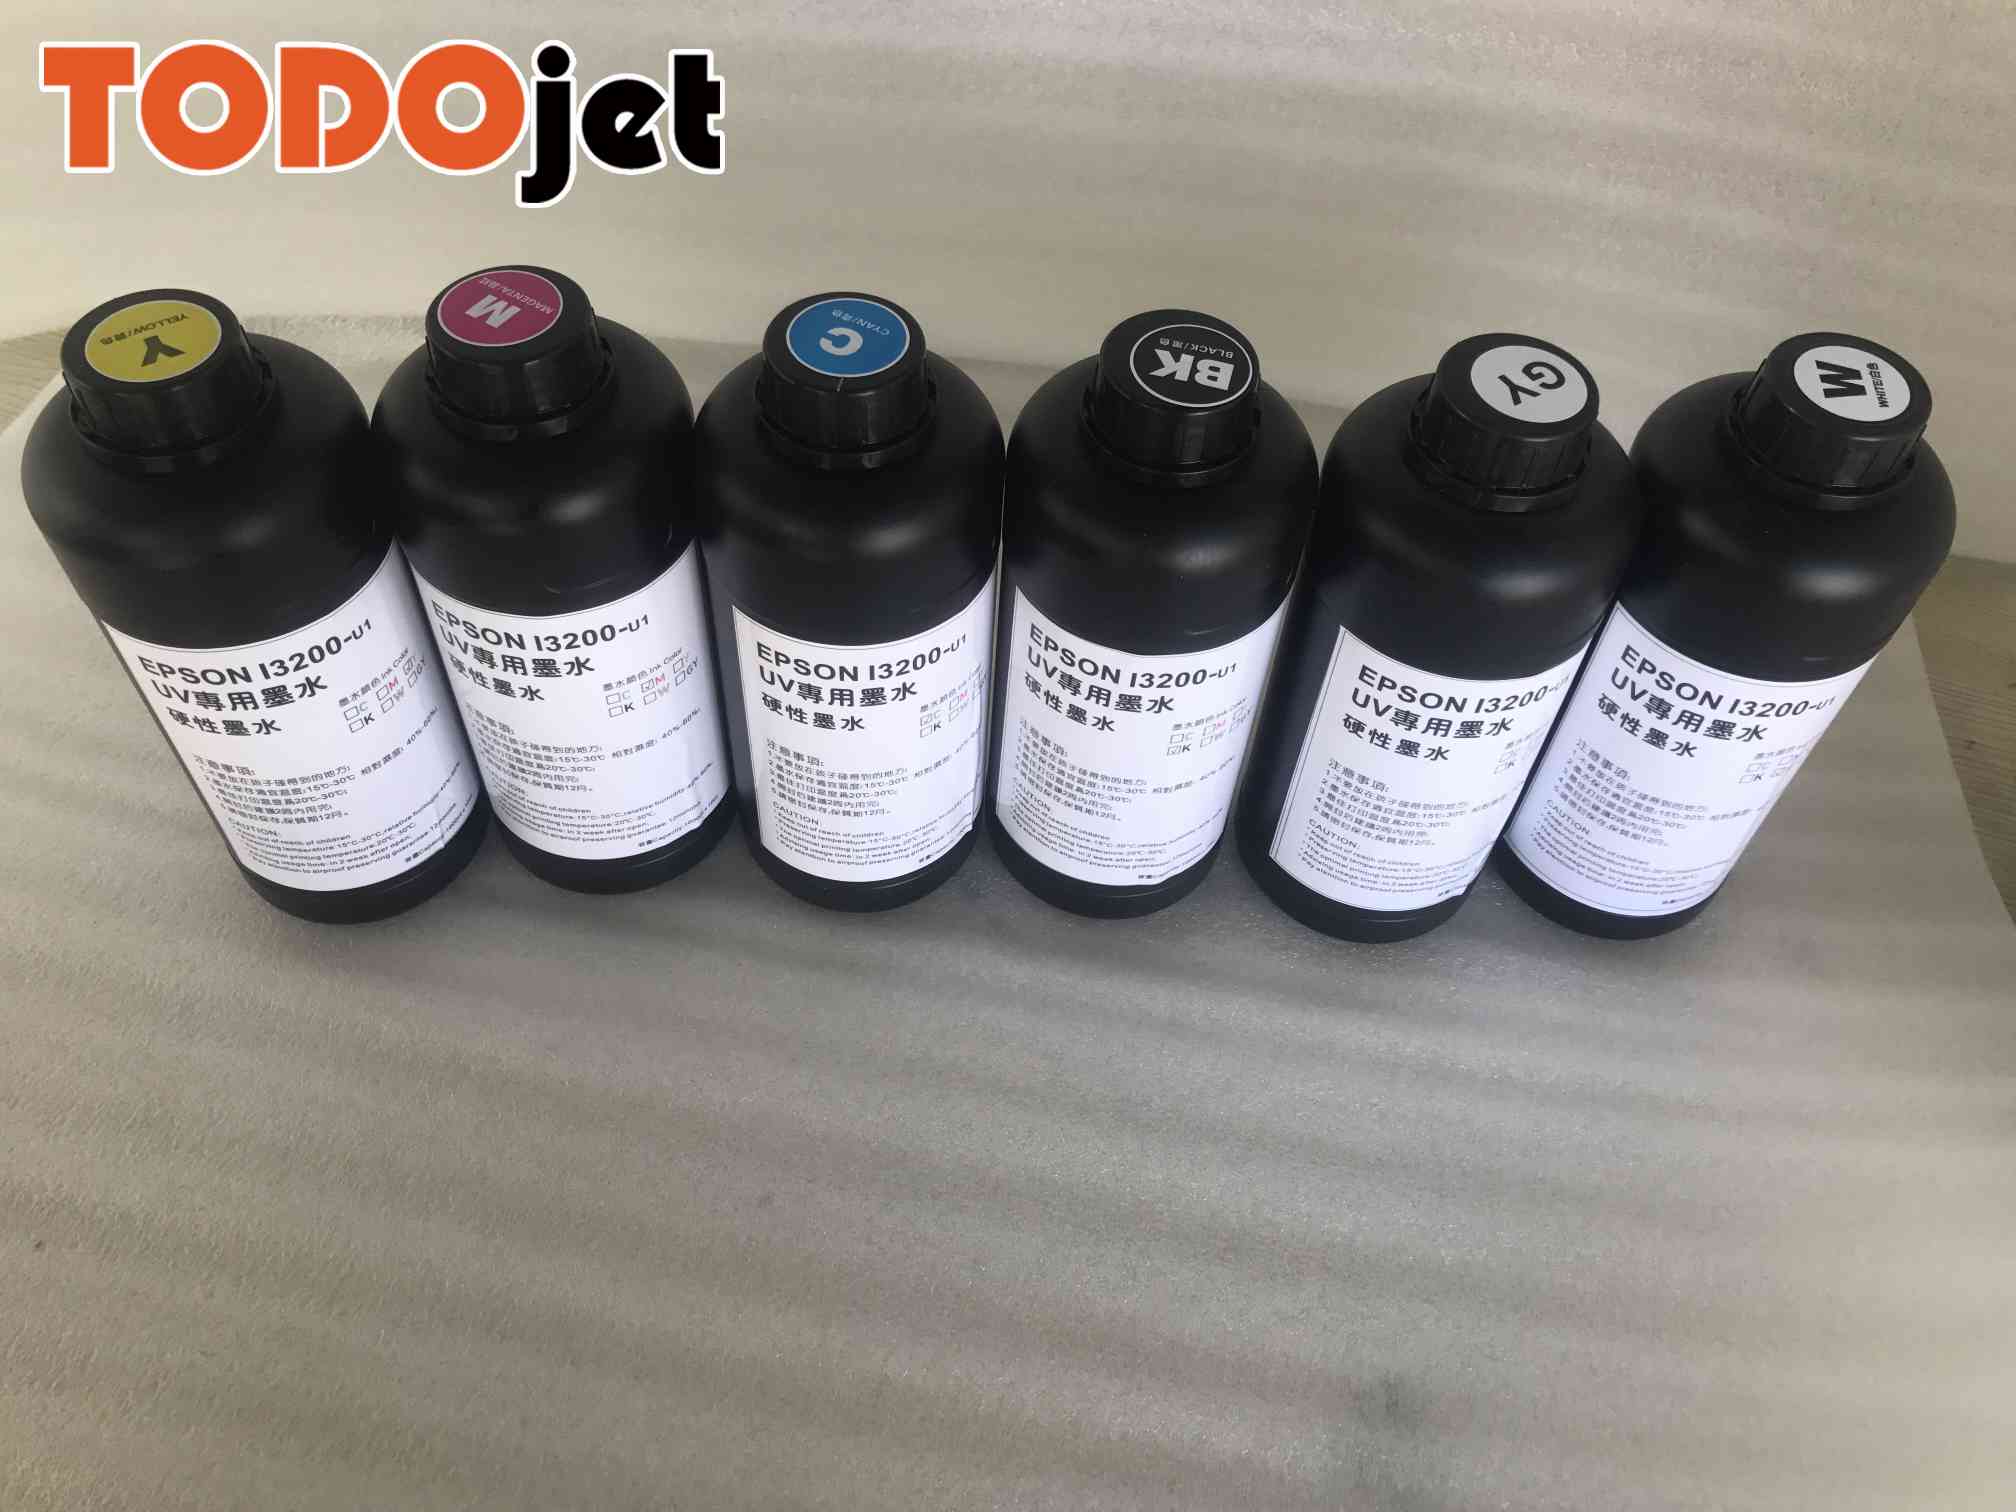 High Quality UV Ink for UV Printer from TODOjet